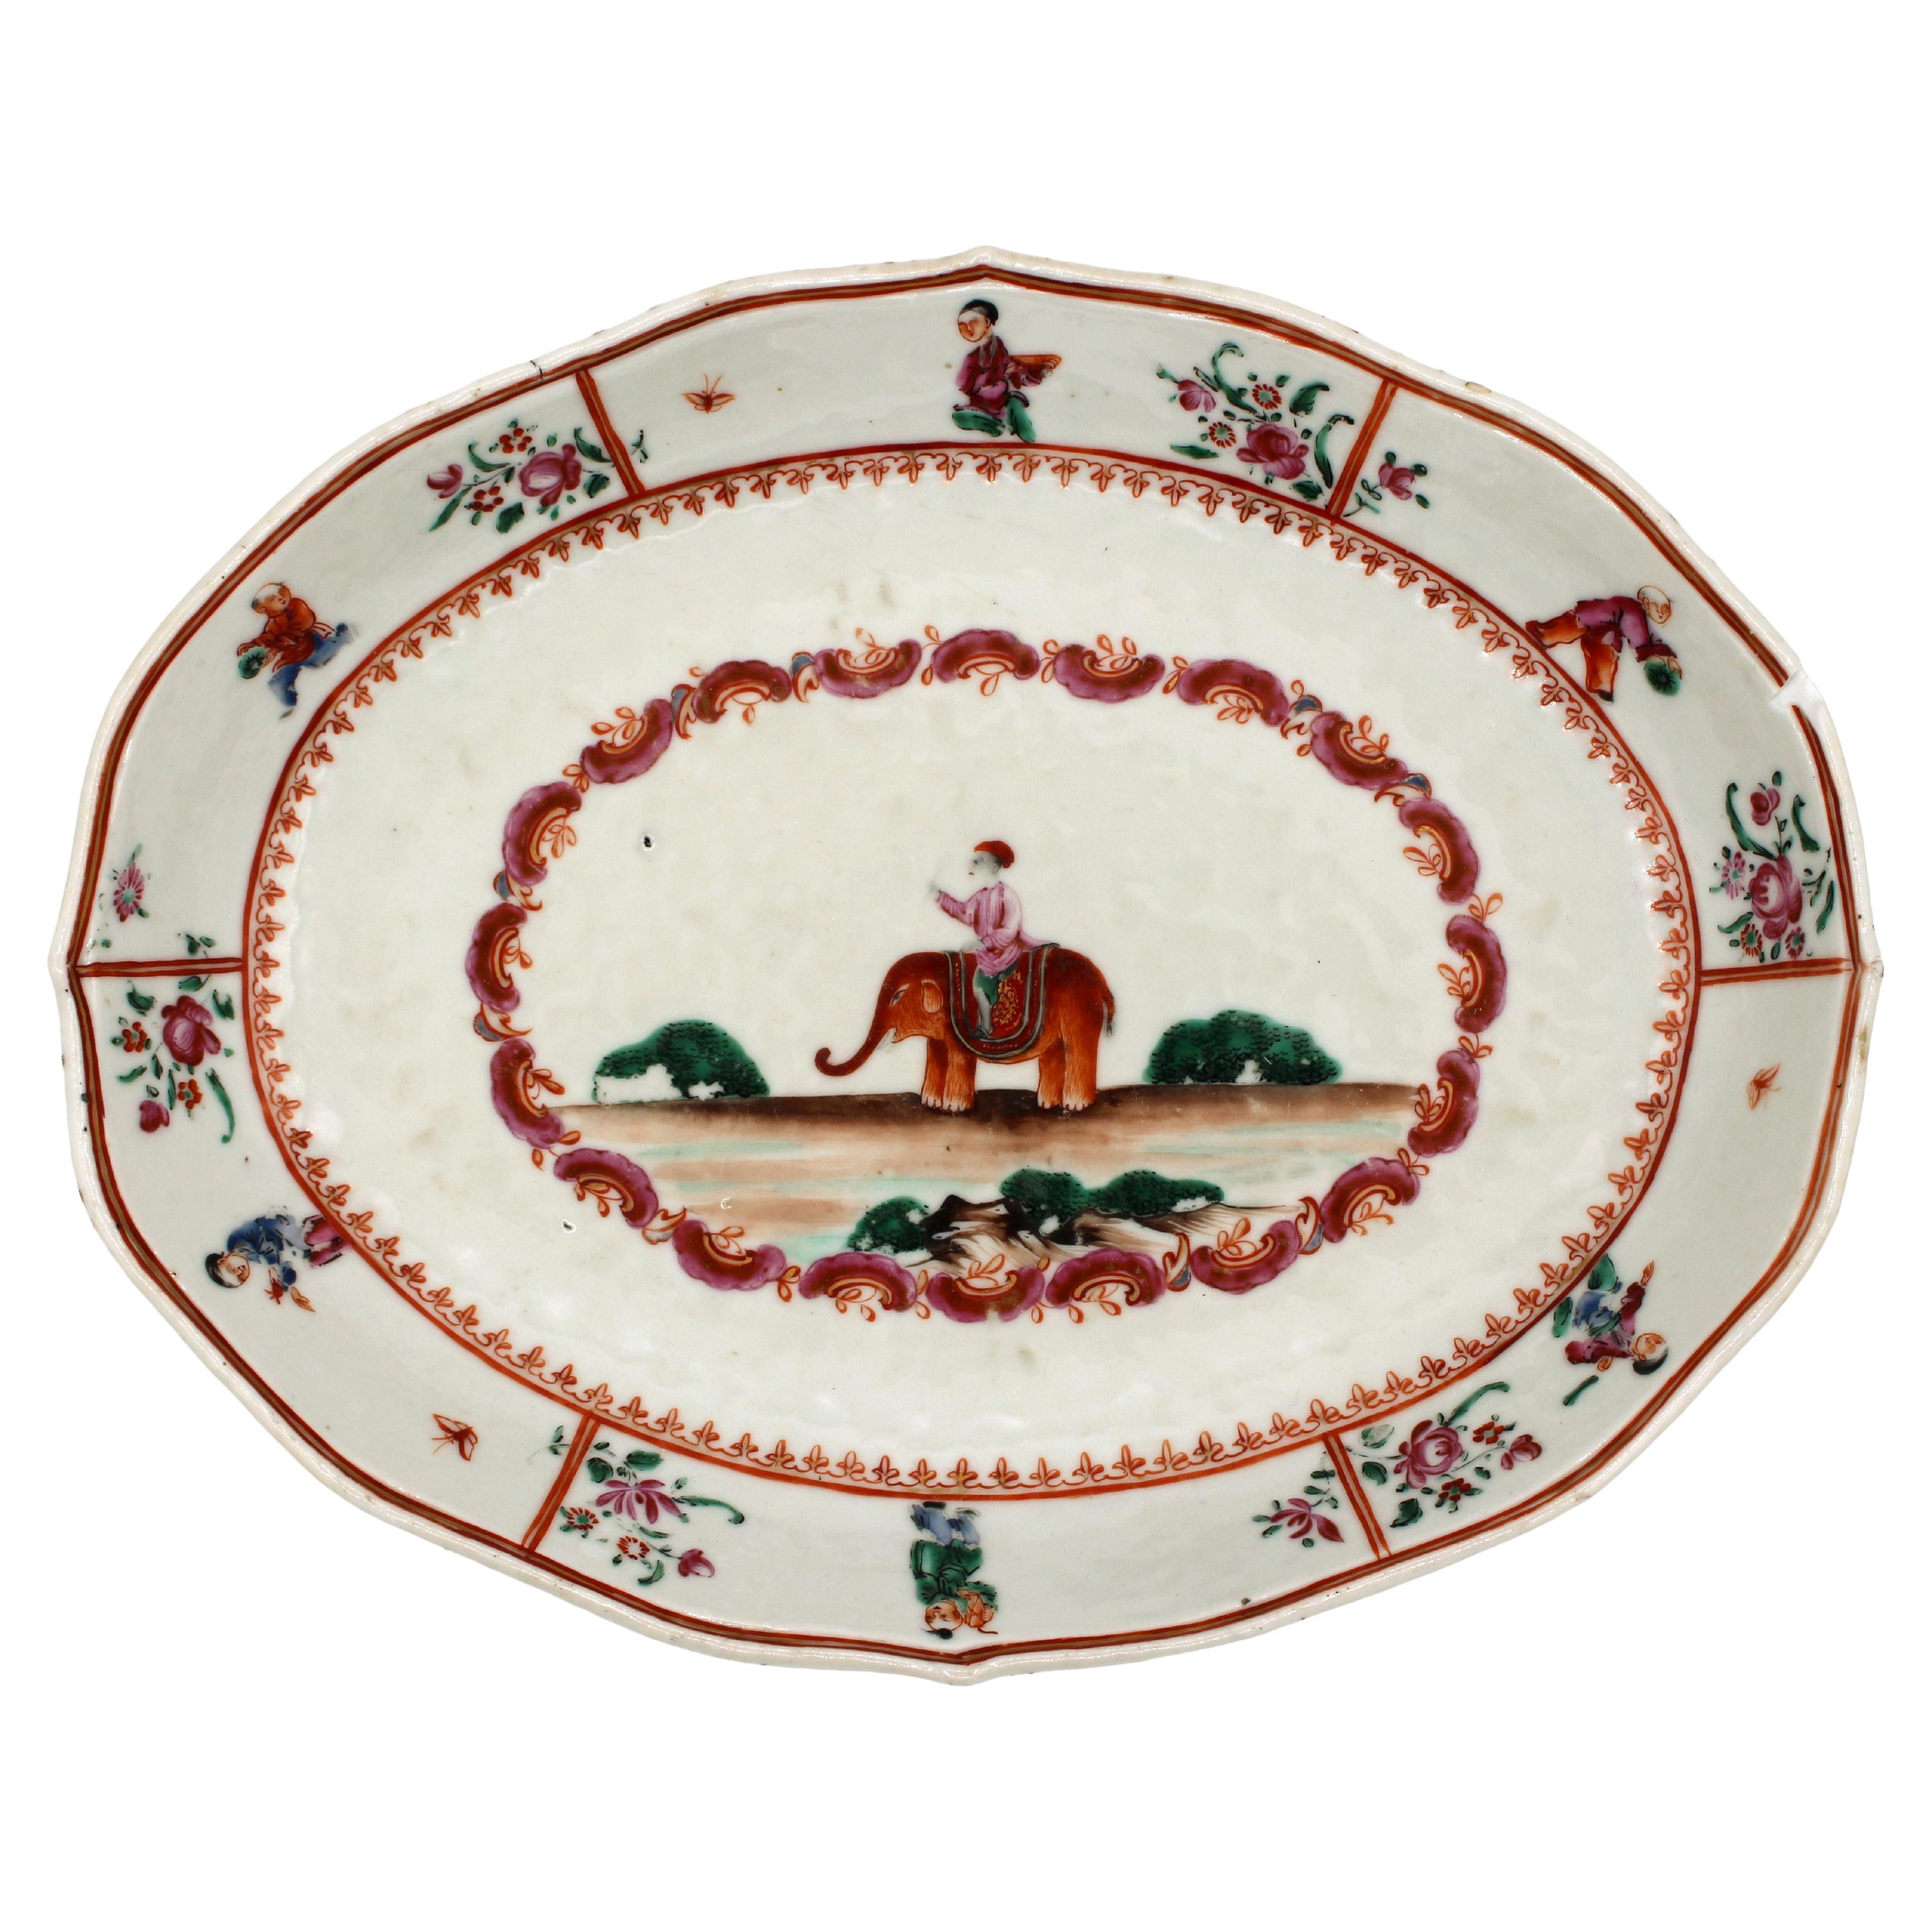 Circa 1780 Chinese "Elephant & Mahout" Vegetable Dish For Sale